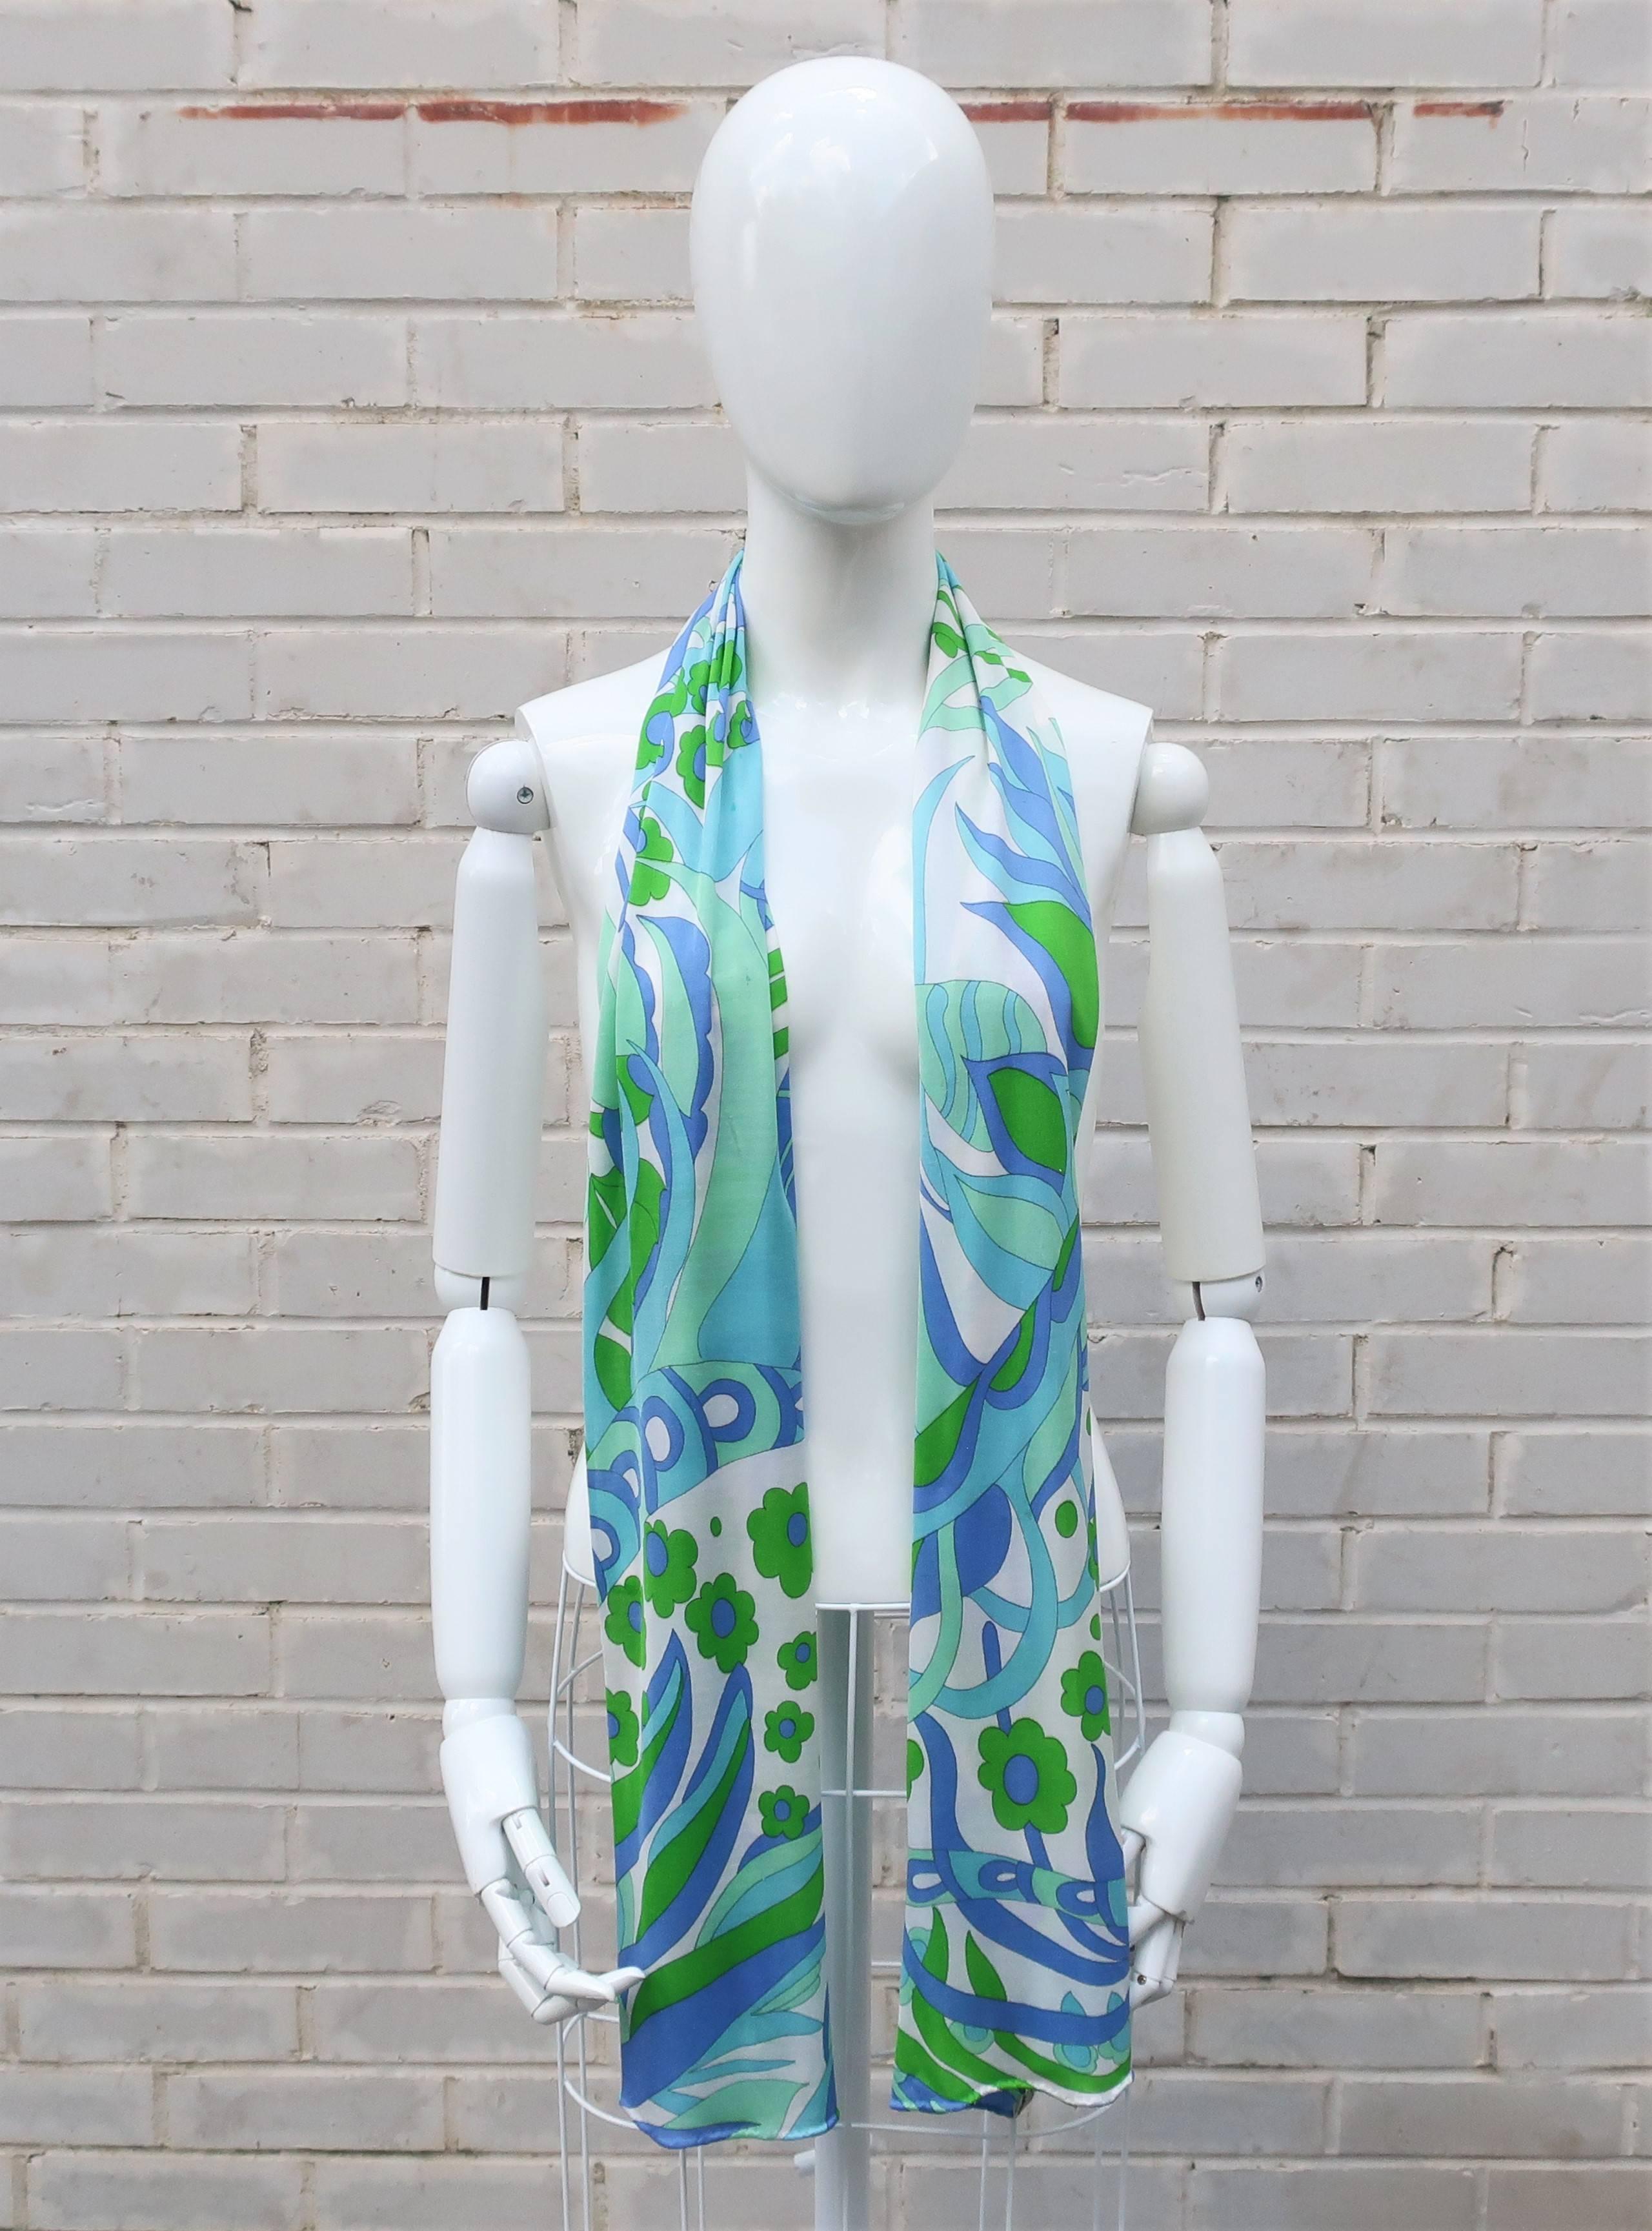 This mod silk jersey scarf was made in Italy for Bloomingdale's with a definitive nod to psychedelic Pucci prints.  The striking combination of aqua, blue, greens and white are a standout and sure to enliven any ensemble.  The slinky jersey makes it